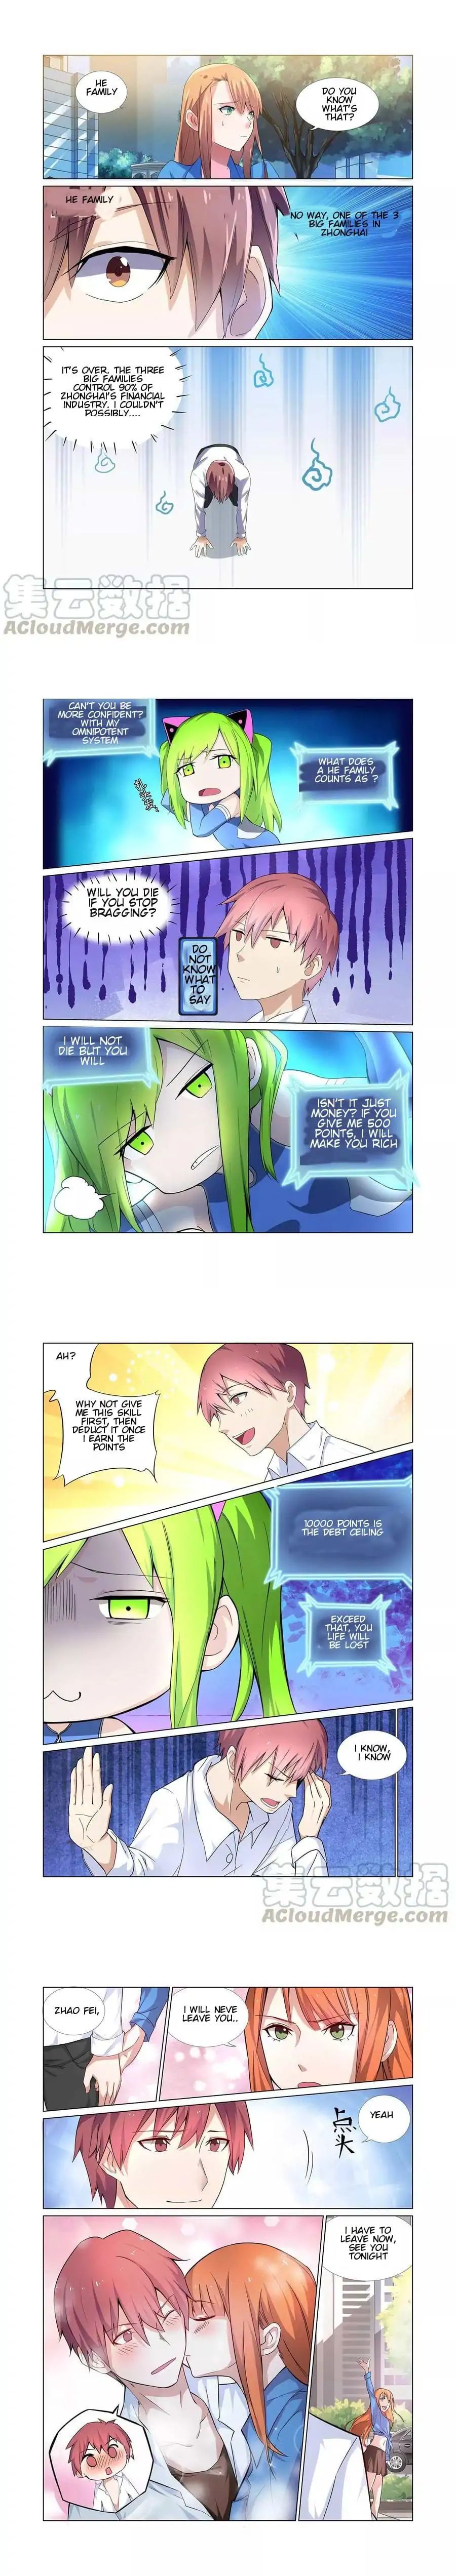 Universal X System Chapter 6 - Page 2